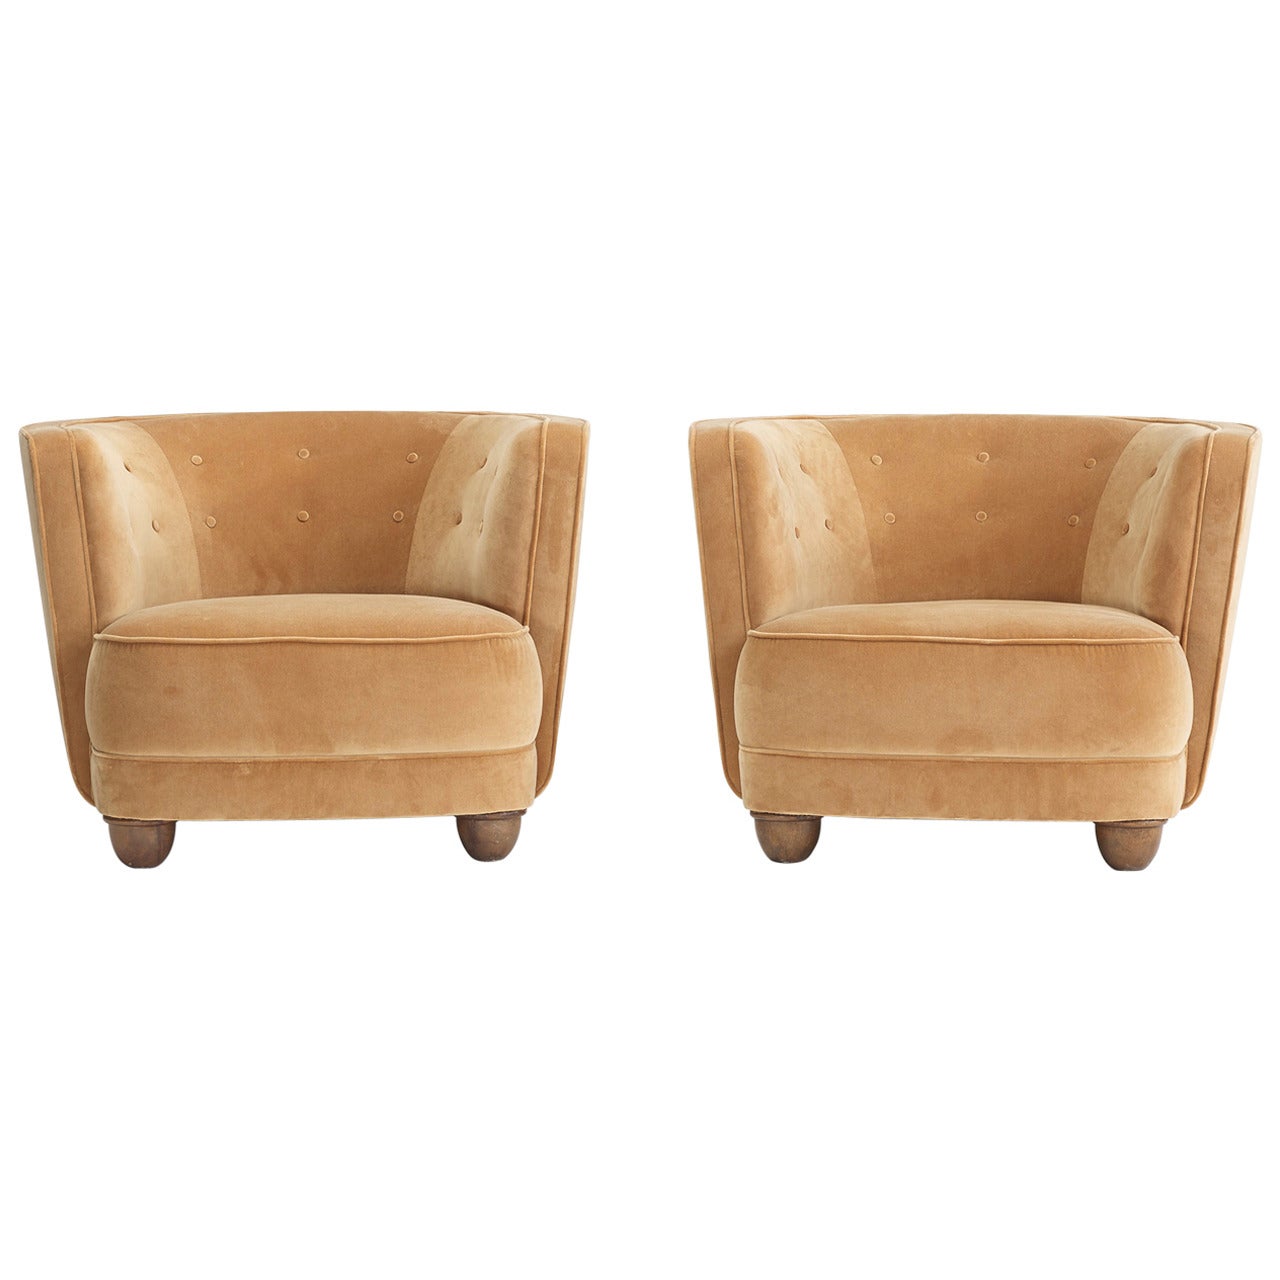 Pair of Danish Cabinetmaker Lounge Chairs For Sale